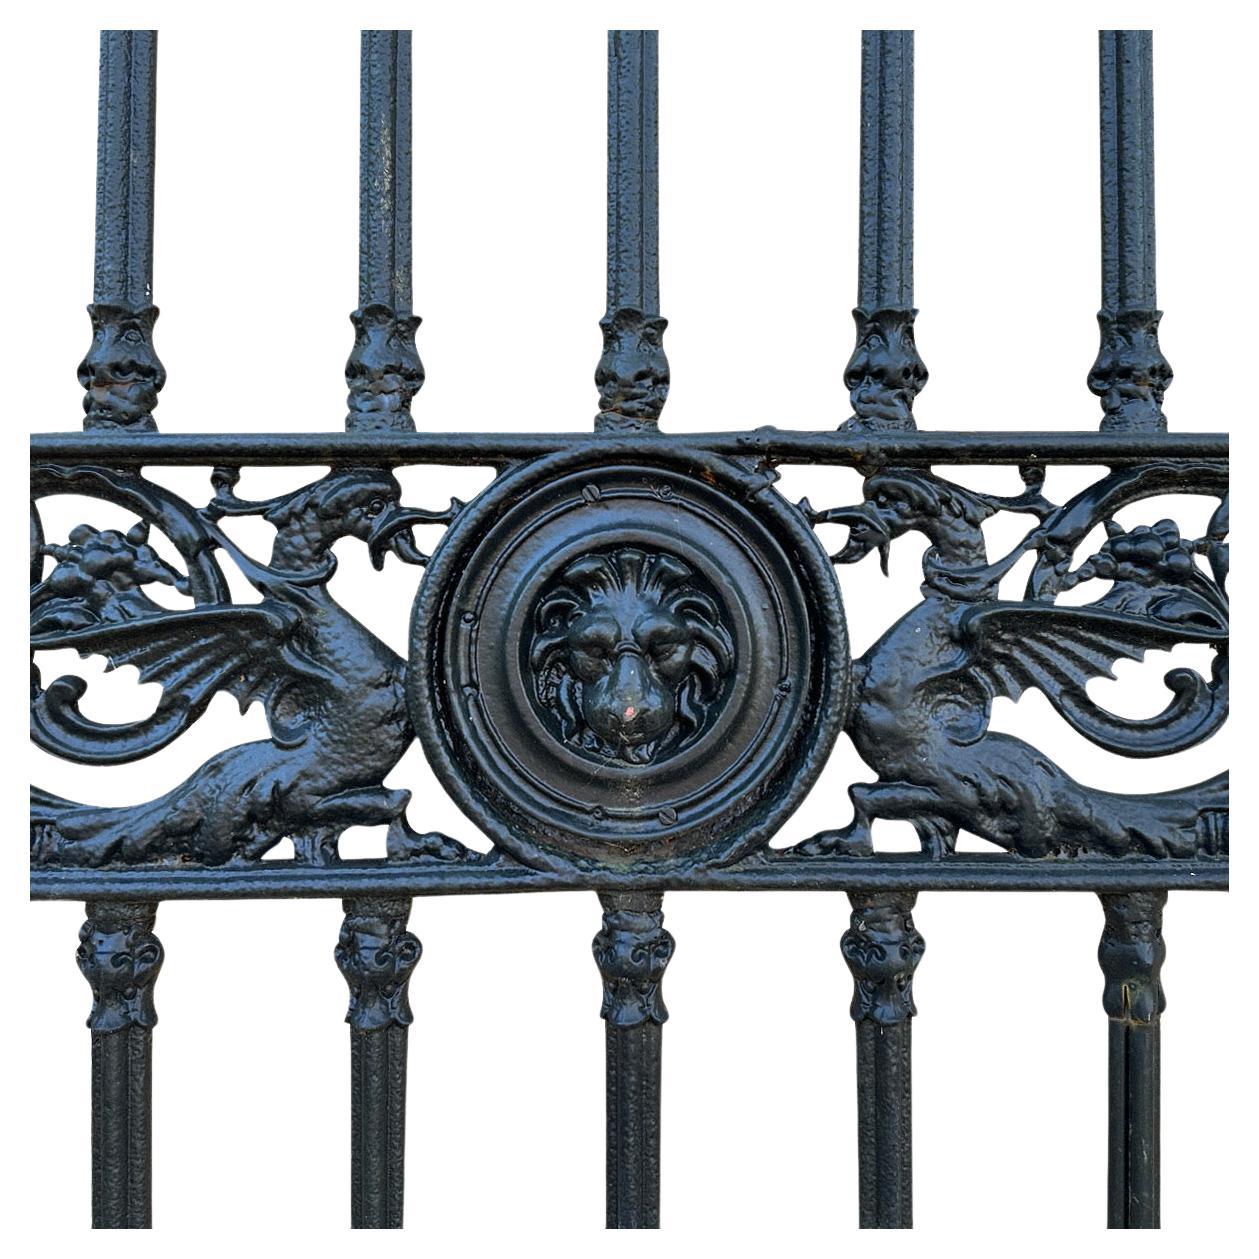 A large pair of drive way or entrance gates in cast iron by renowned Foundry originally founded in the English Regency Period. Incredibly decorative and very well cast with serpents, lions masks in roundels, scrolled foliate and cameo masks. Foundry